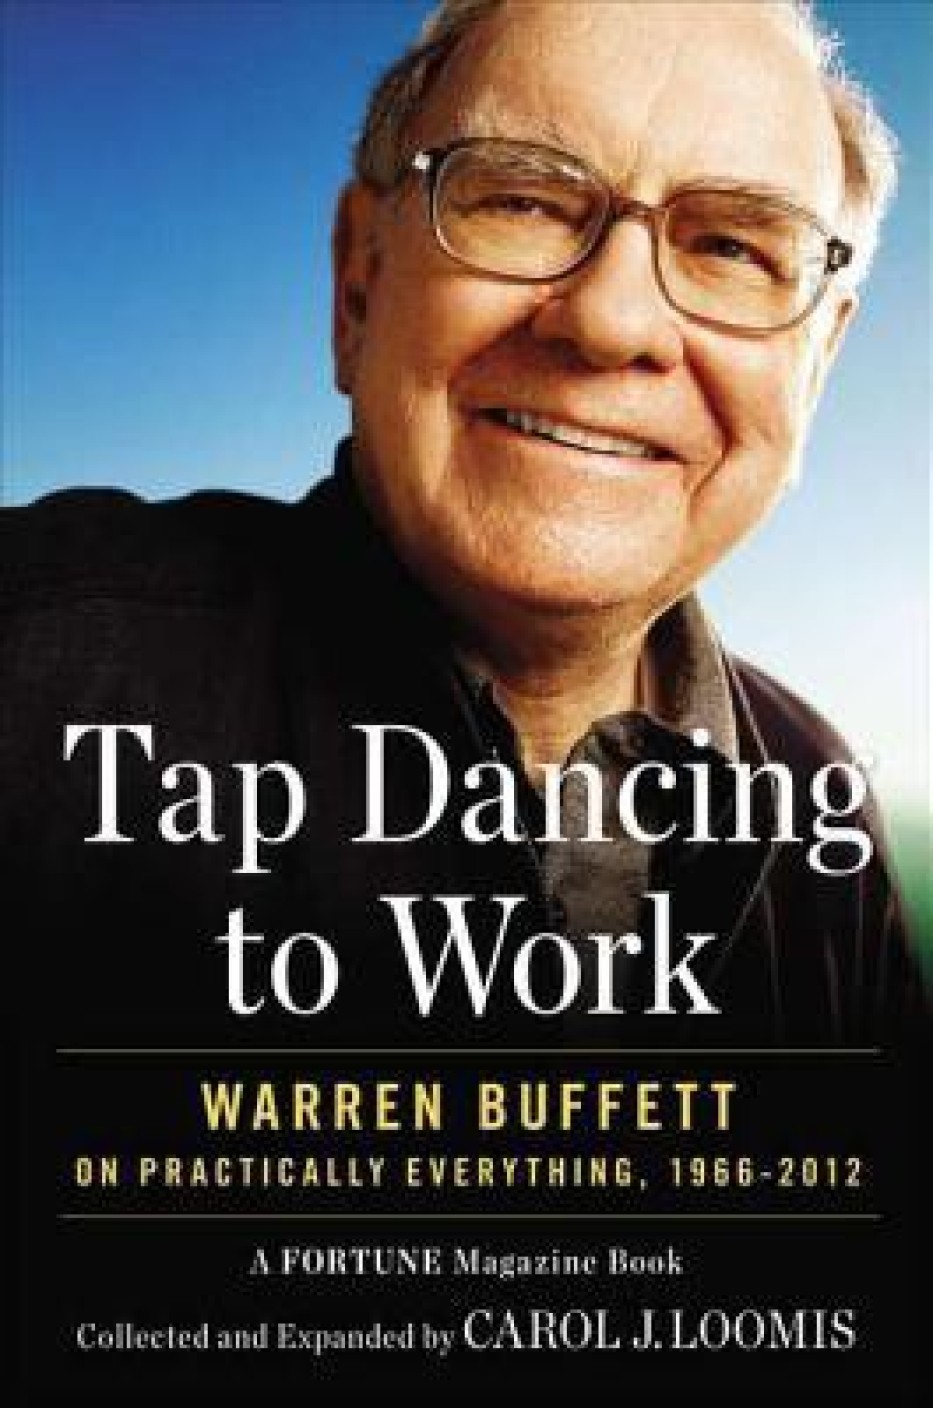 Book Review: Tap Dancing to Work: Warren Buffett on Practically Everything, 1966-2012 by Carol J. Loomis